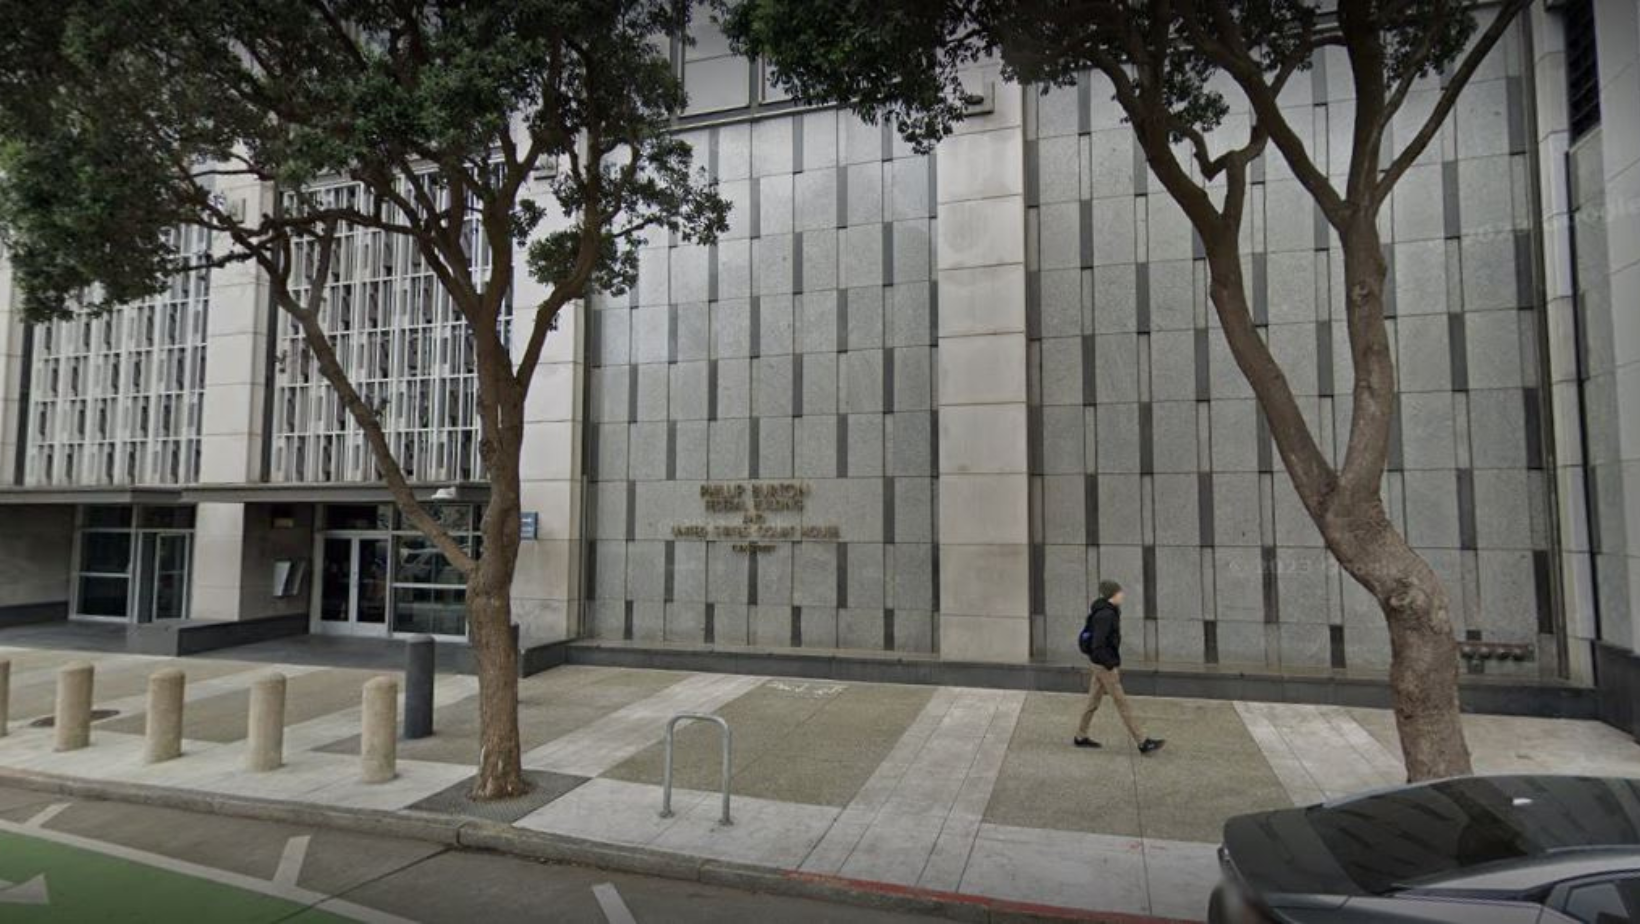 Oakland Man Sentenced to 24 Months for Mail Theft and Break-In of Postal Truck